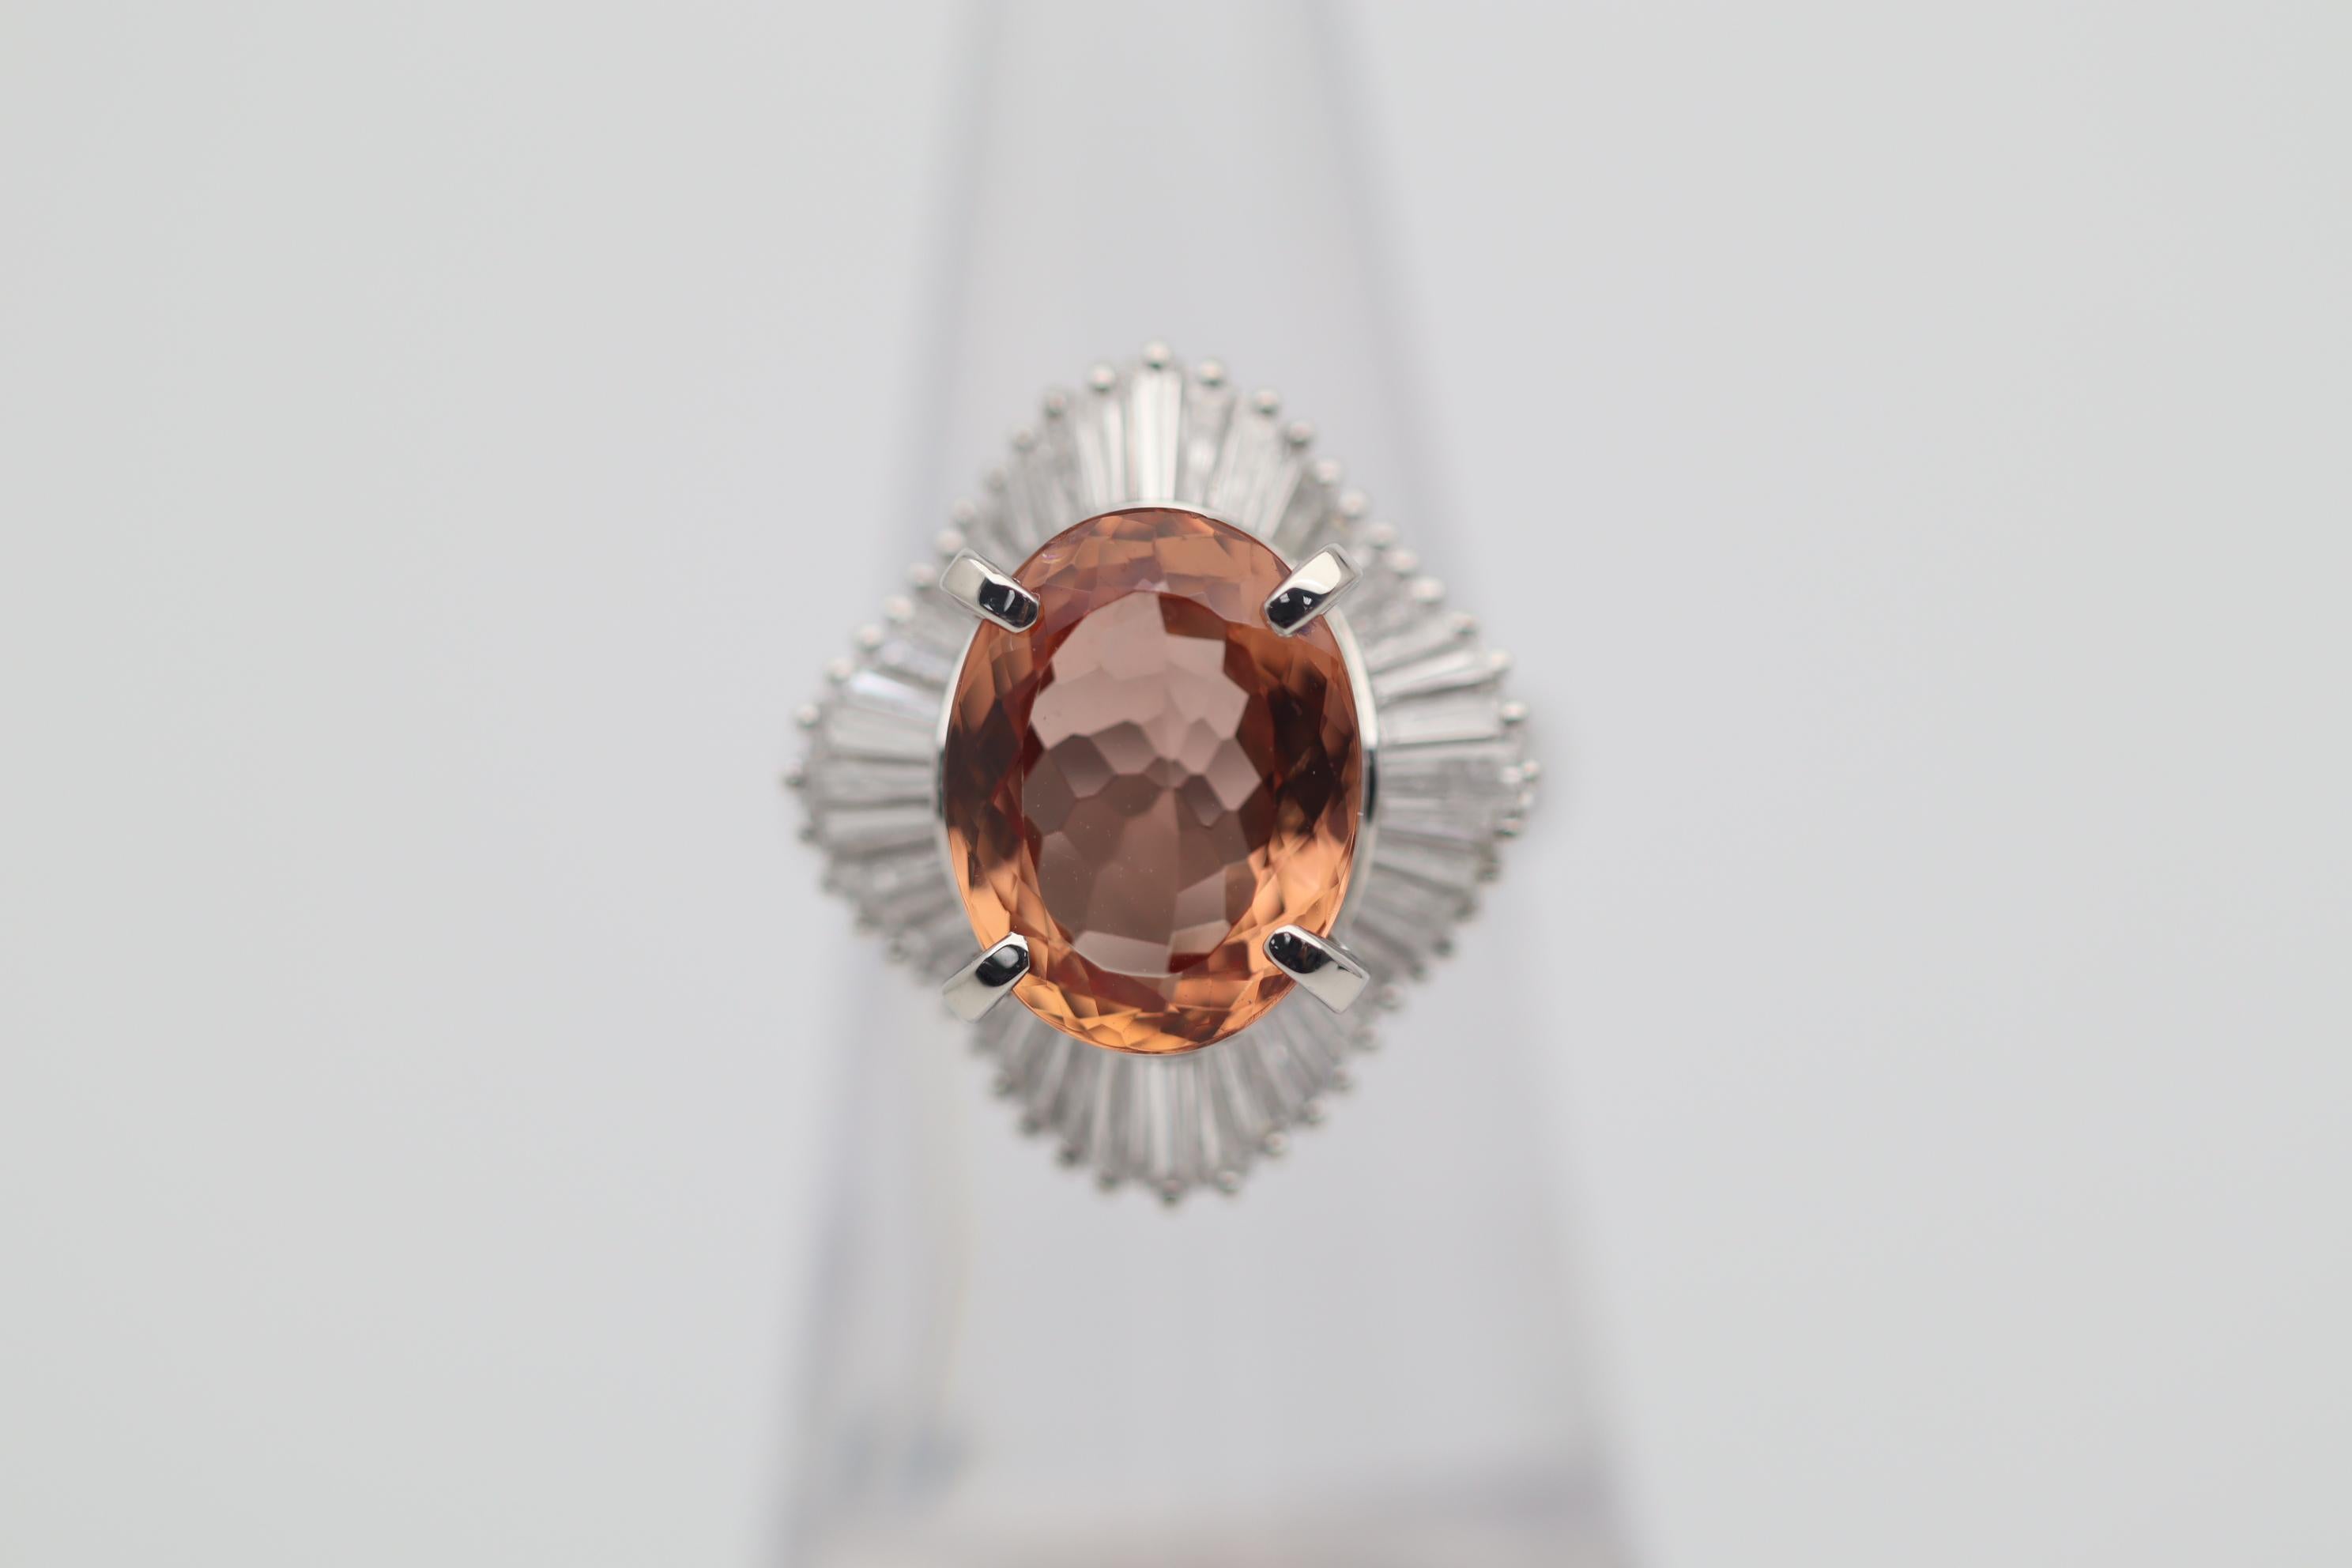 Here we have a true “imperial” topaz weighing an impressive 5.62 carats. Many times, non-precious topaz is called imperial when it does not have the correct color with a red component to it. This topaz on the other hand has a rich red-orange color